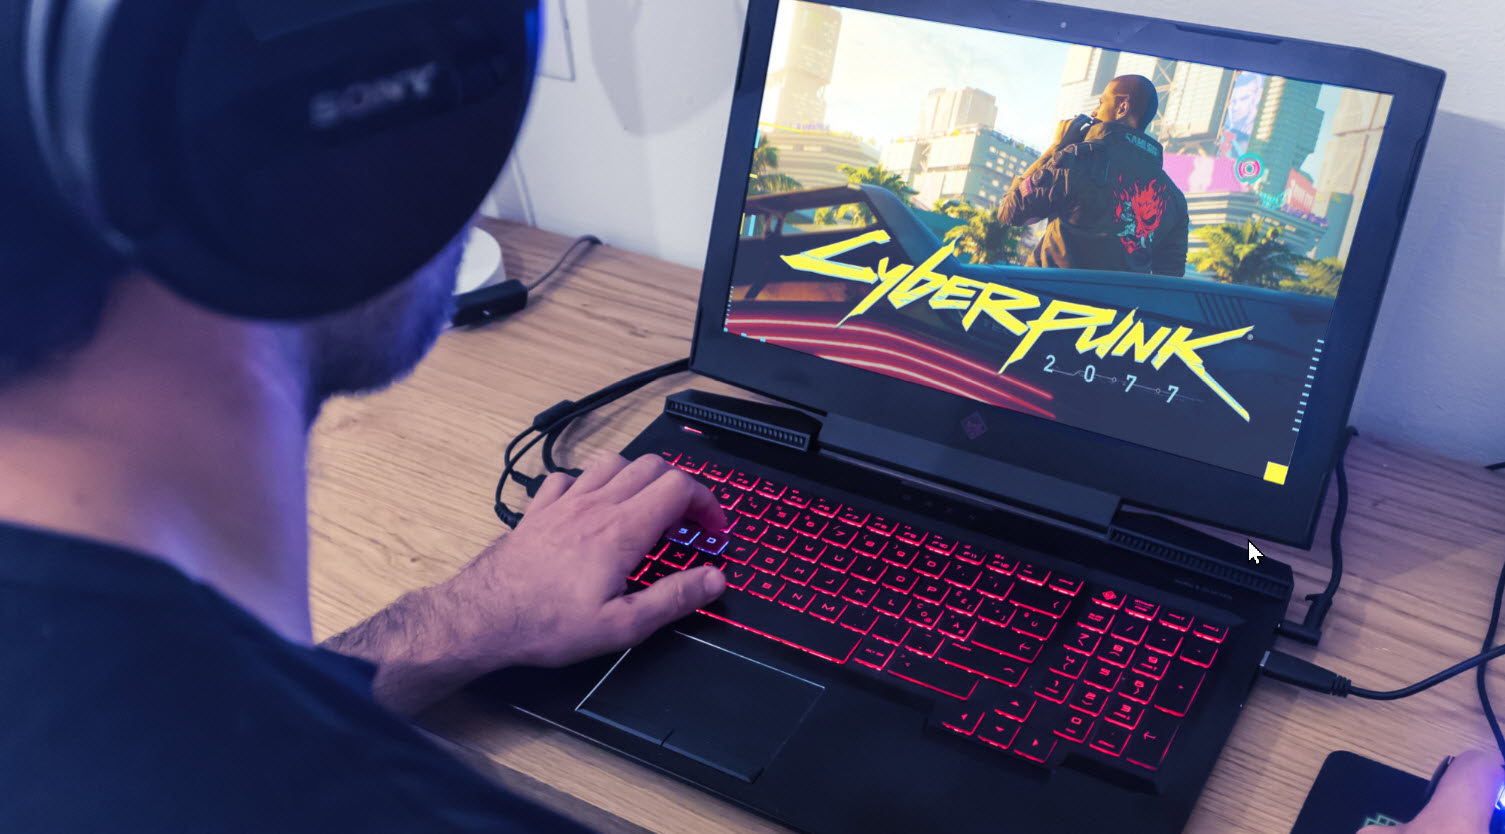 How to Optimize Windows 10 for Gaming and Performance in 2021